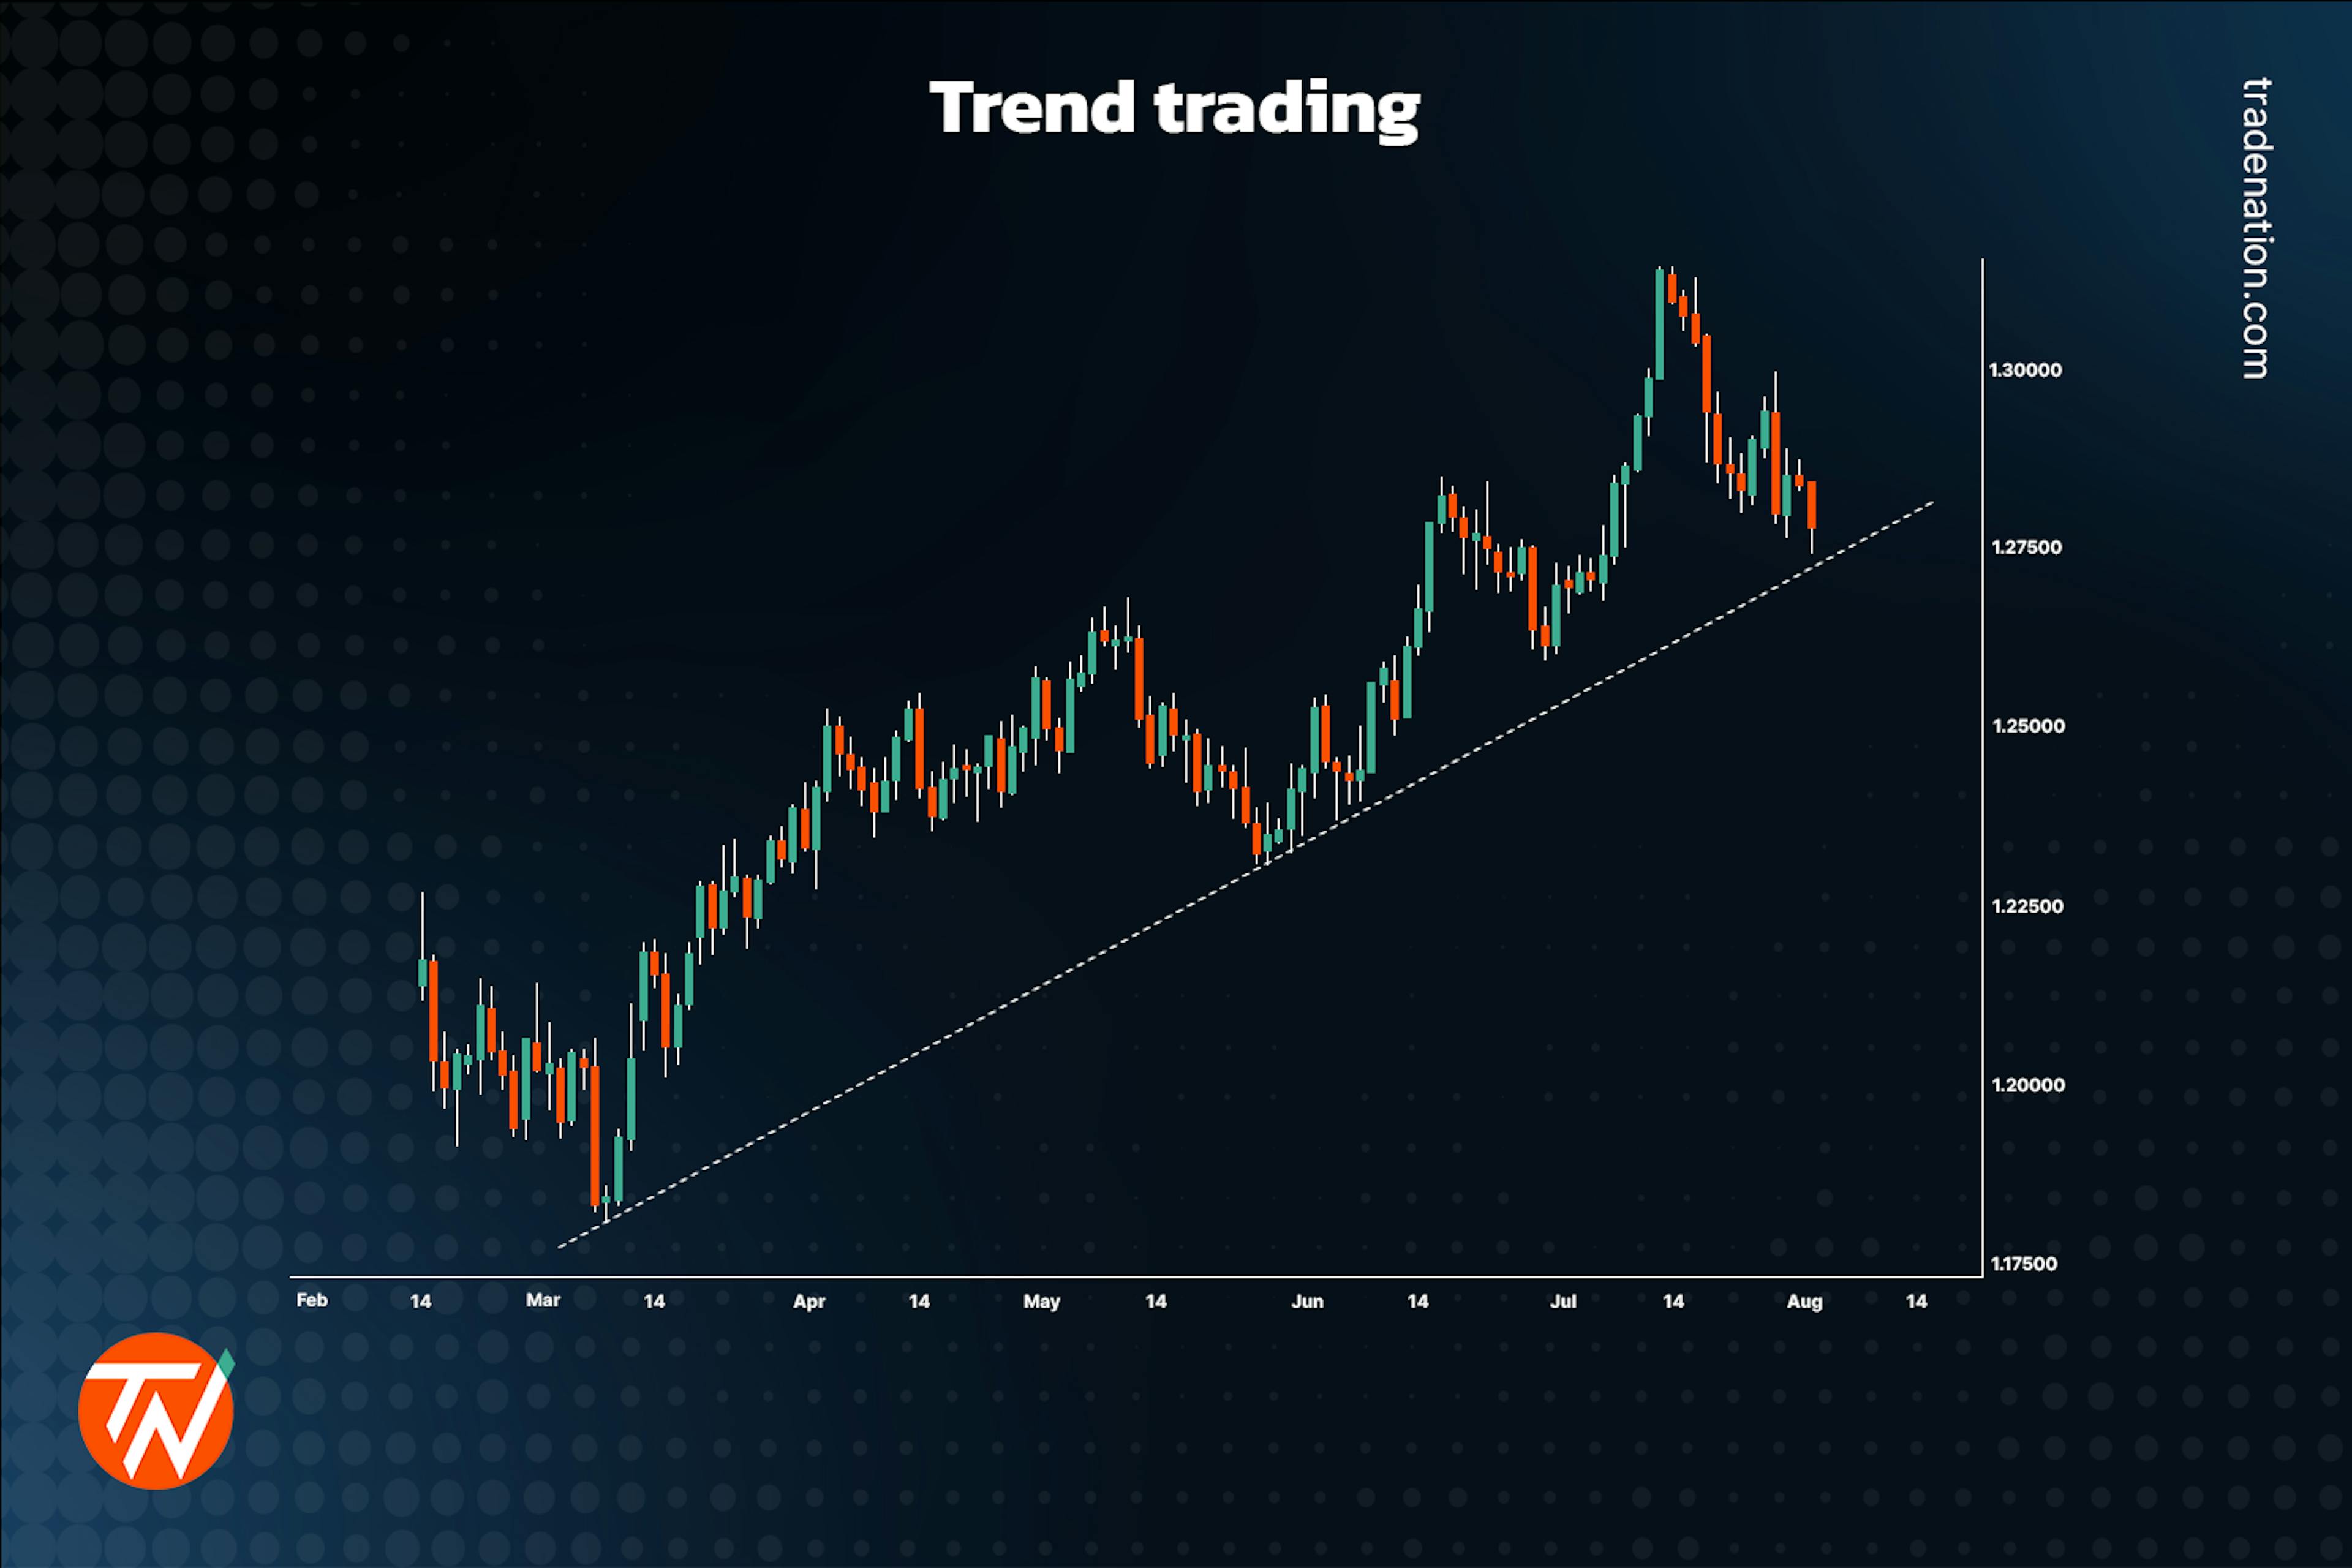 Trend trading explained